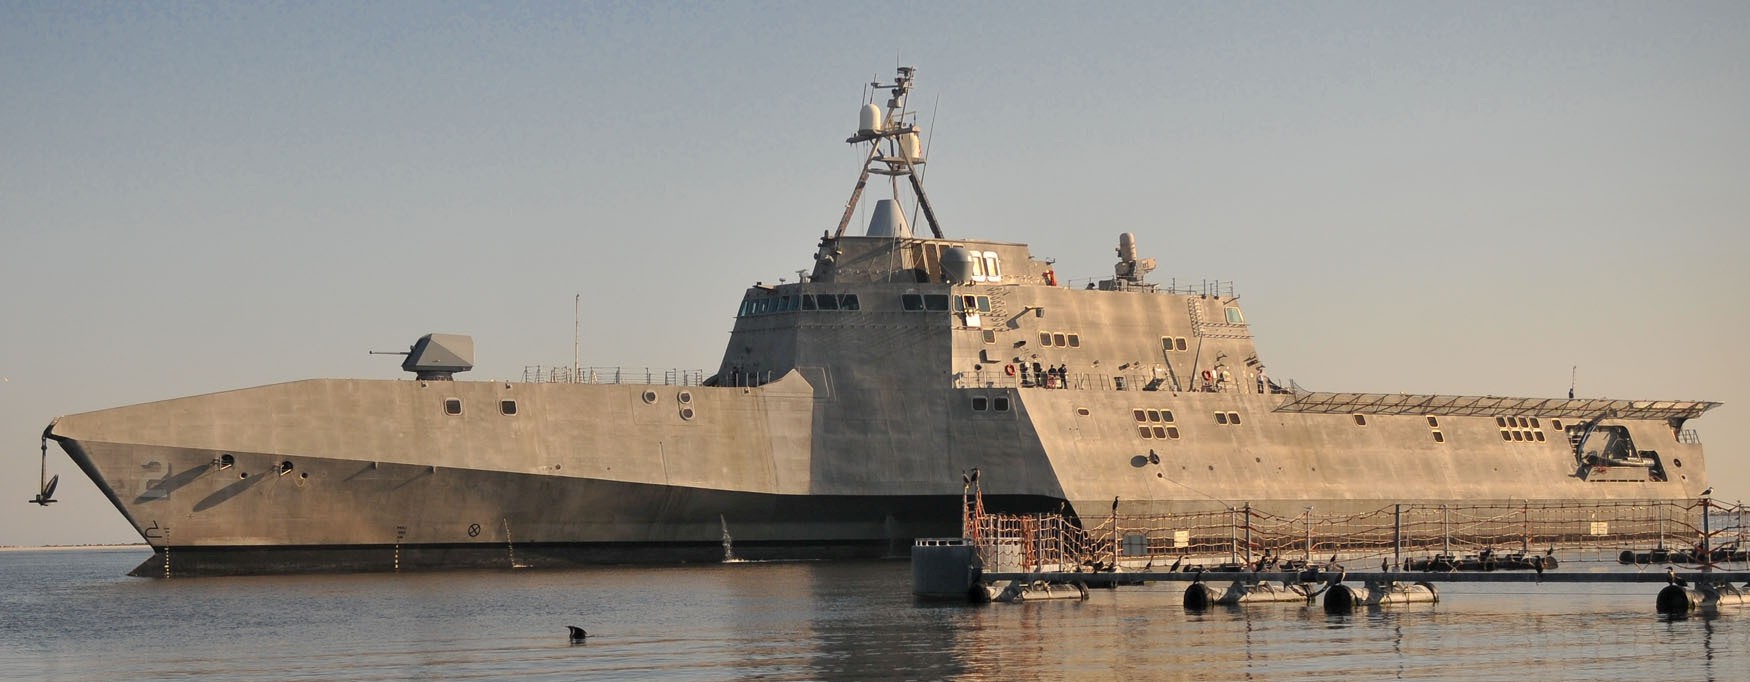 lcs-2 uss independence littoral combat ship us navy class 02 naval station mayport florida